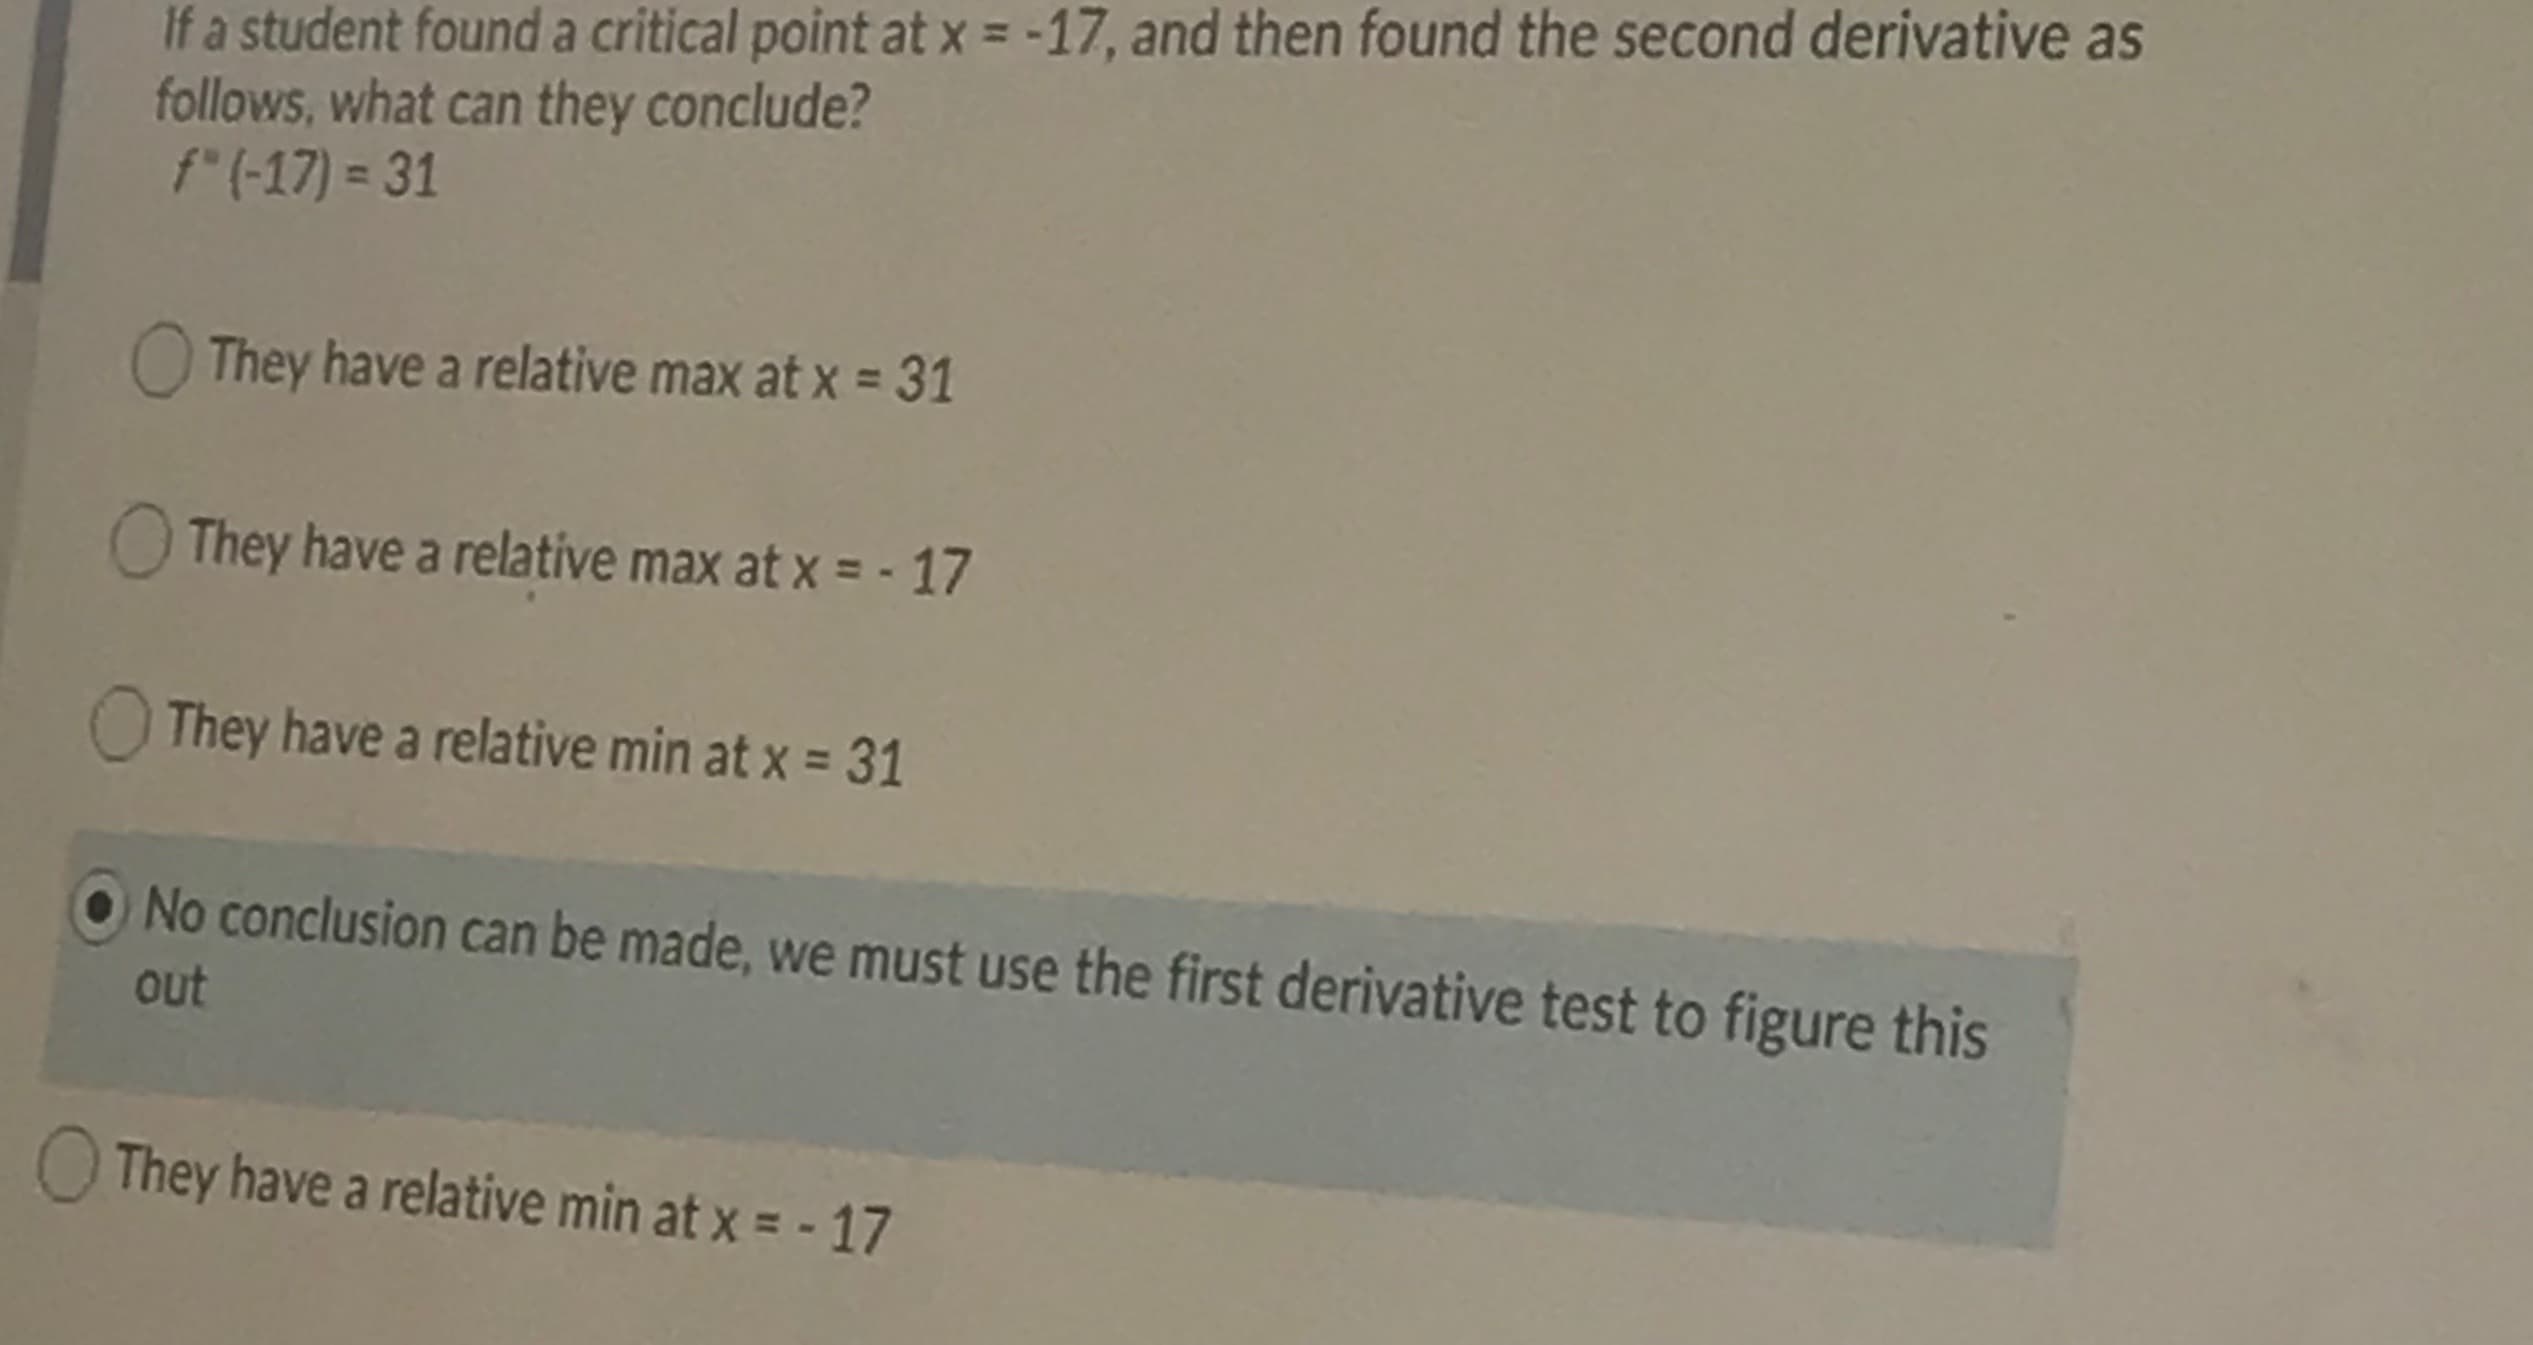 If a student found a critical point at x = -17, and then found the second derivative as
follows, what can they conclude?
f"(-17) = 31
They have a relative max at x = 31
O They have a relative max at x = - 17
They have a relative min at x = 31
No conclusion can be made, we must use the first derivative test to figure this
out
OThey have a relative min at x = - 17
